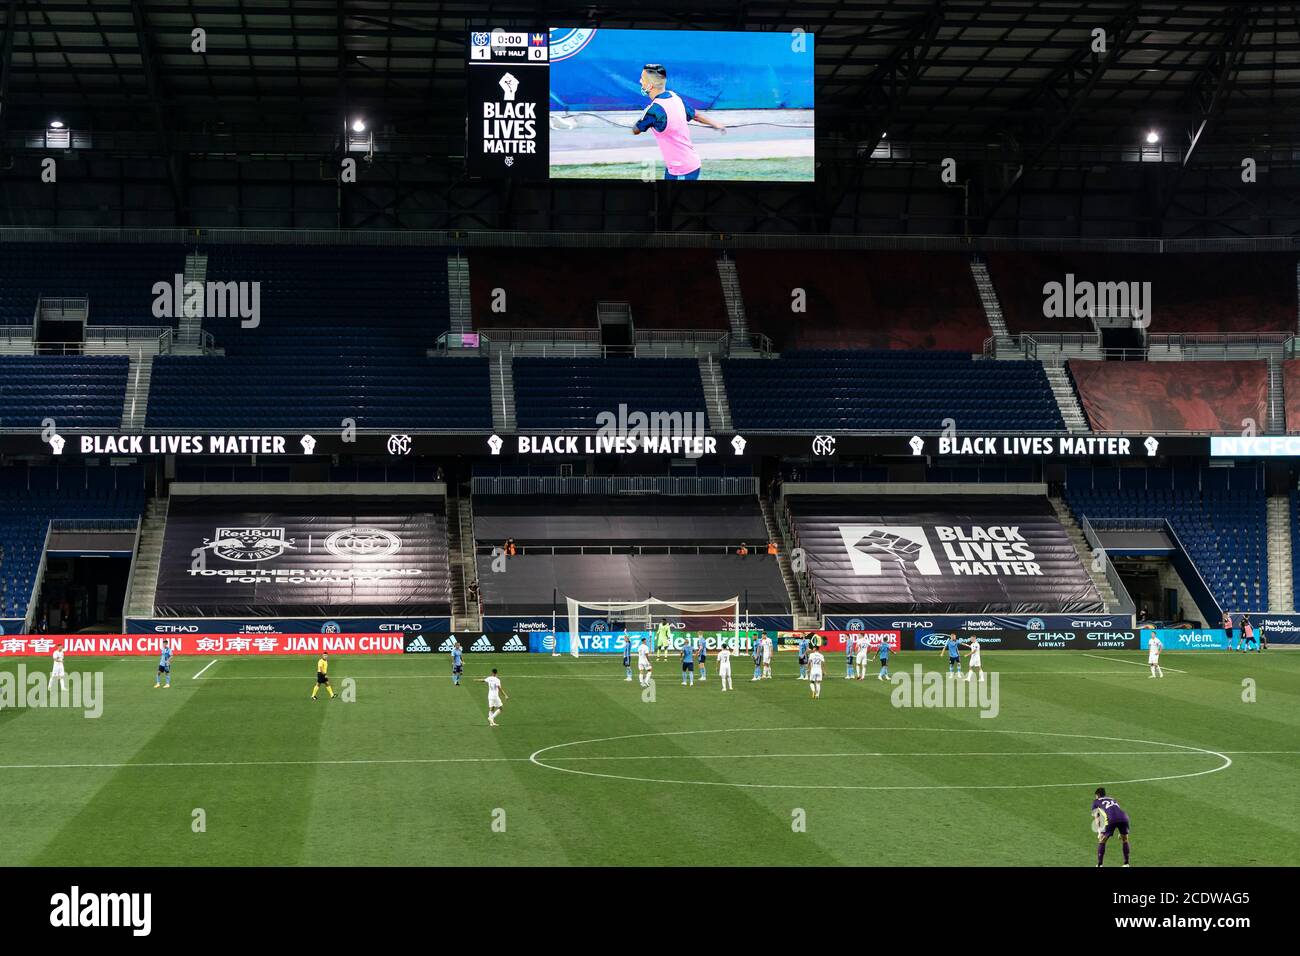 Harrison, NJ - August 29, 2020: General view during the match between Chicago Fire FC and NYCFC during MLS regular season at Red Bull Arena Stock Photo